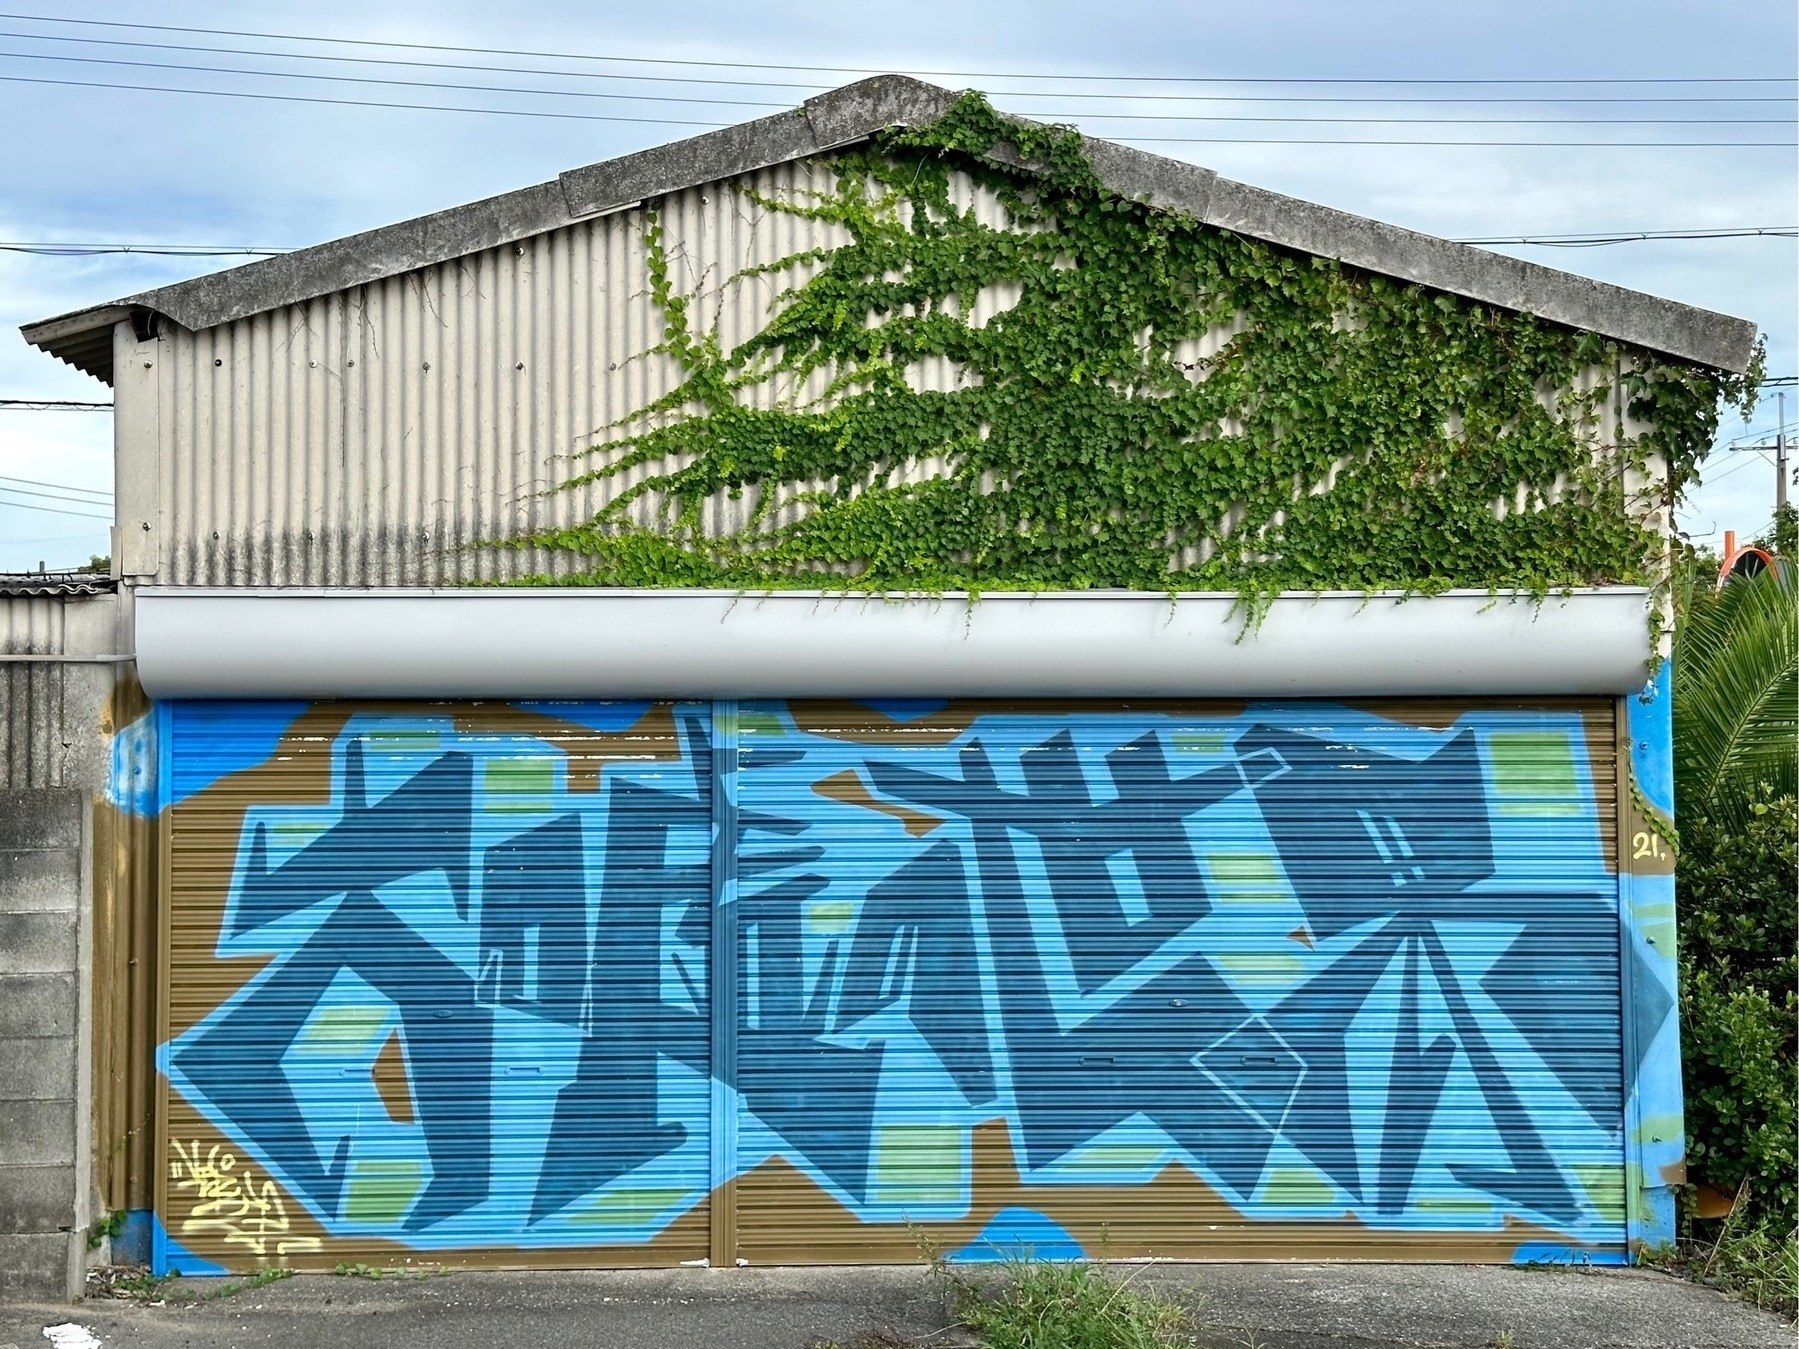 Mural on the side of a small warehouse building, consisting of five large blue stylised Japanese characters